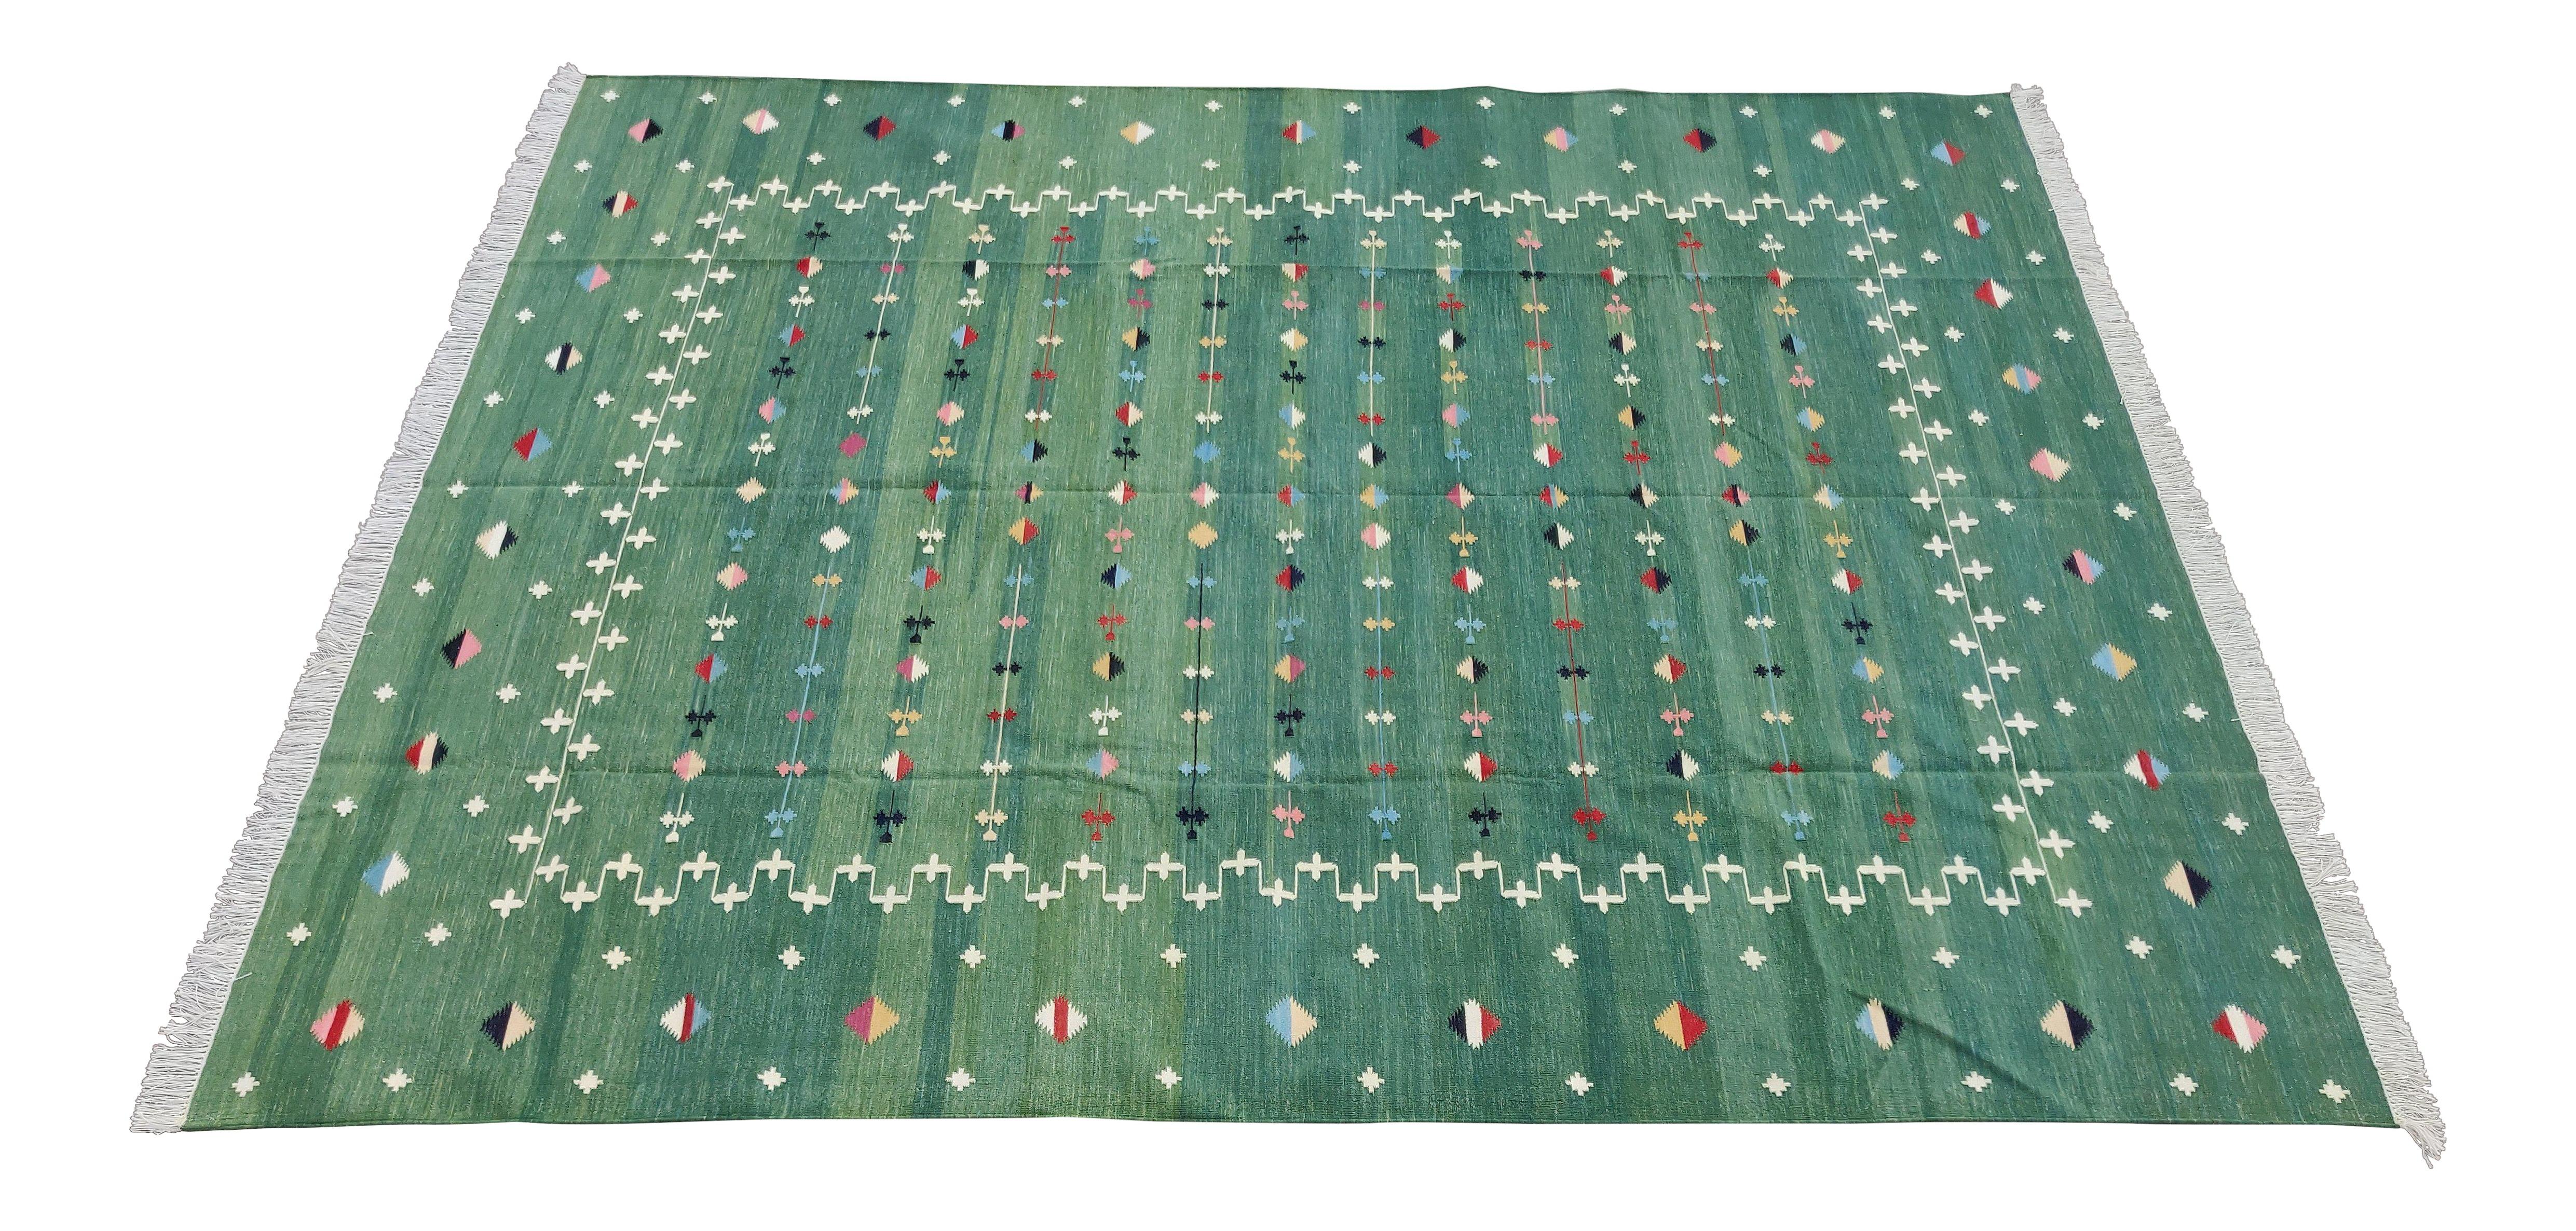 Hand-Woven Handmade Cotton Area Flat Weave Rug, 12x15 Green Shooting Star Indian Dhurrie For Sale